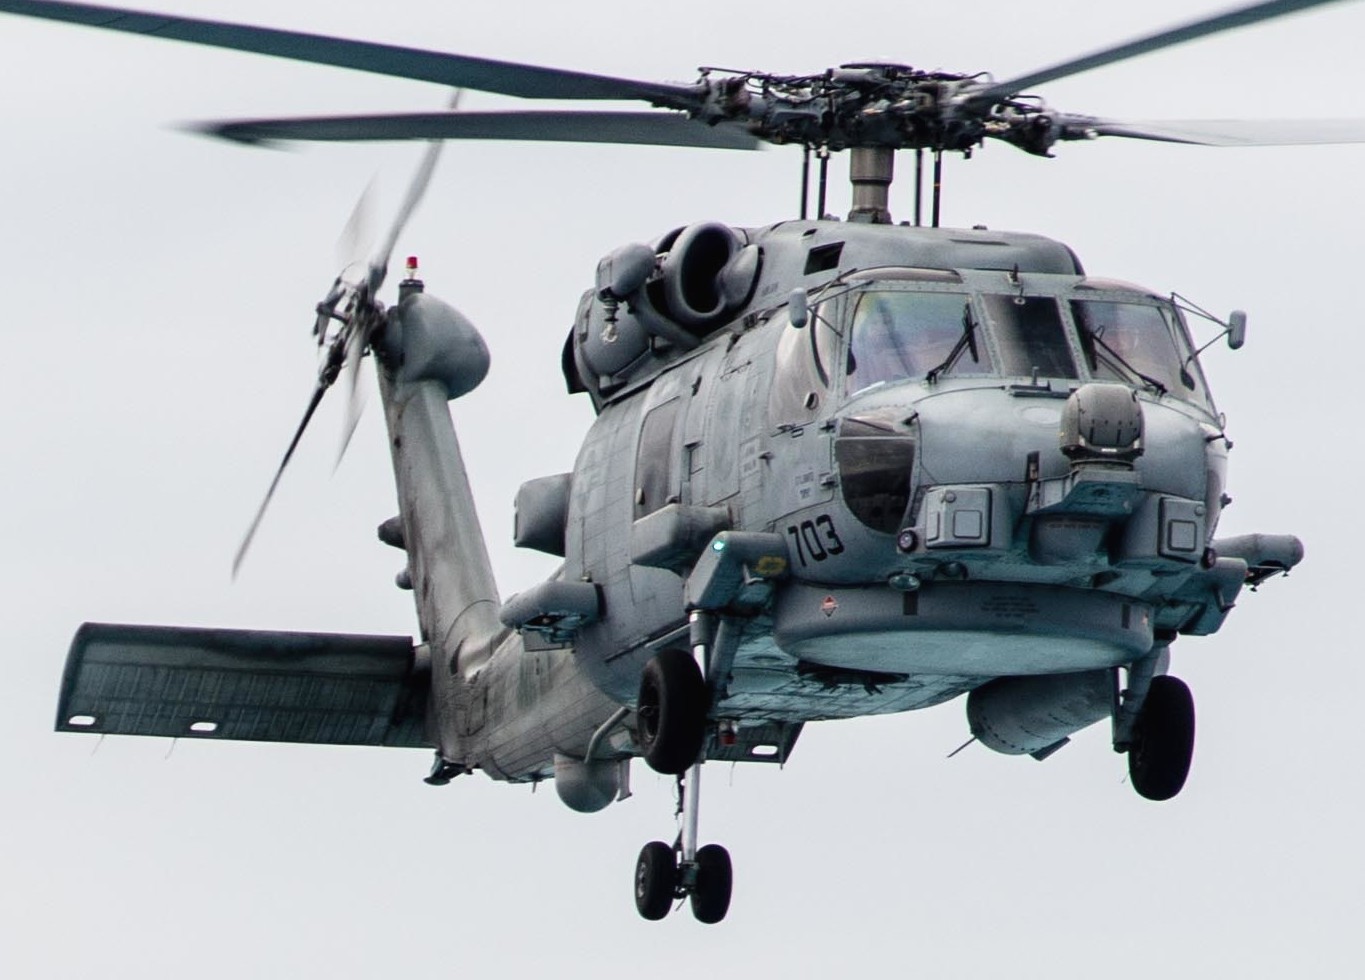 hsm-71 raptors helicopter maritime strike squadron mh-60r seahawk navy 2015 78